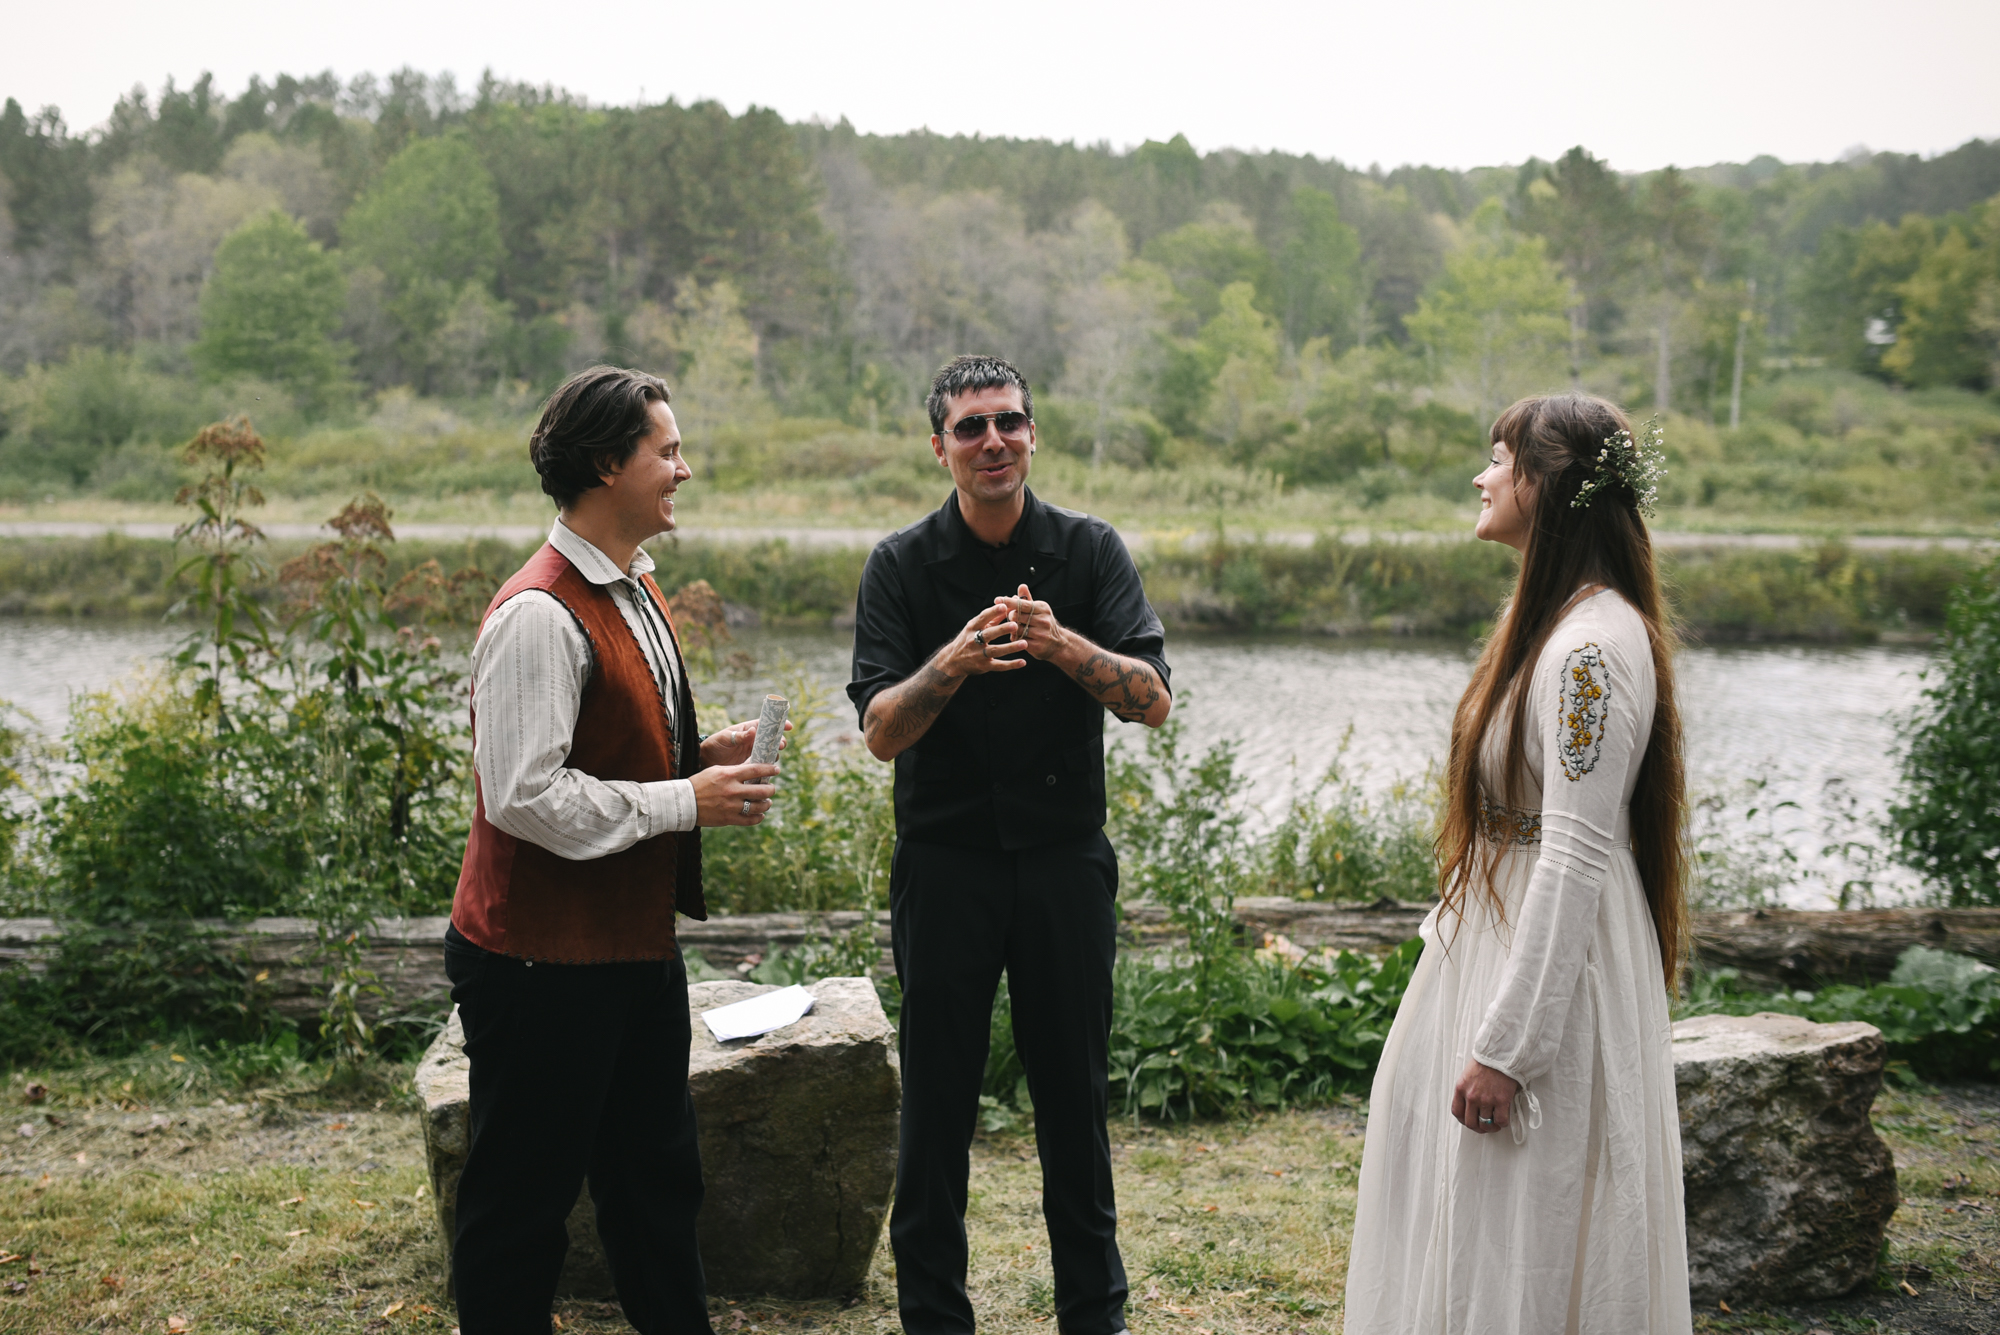  Mountain Wedding, Outdoors, Rustic, West Virginia, Maryland Wedding Photographer, DIY, Casual, bride and groom standing in front of officiant, Embroidered wedding dress 